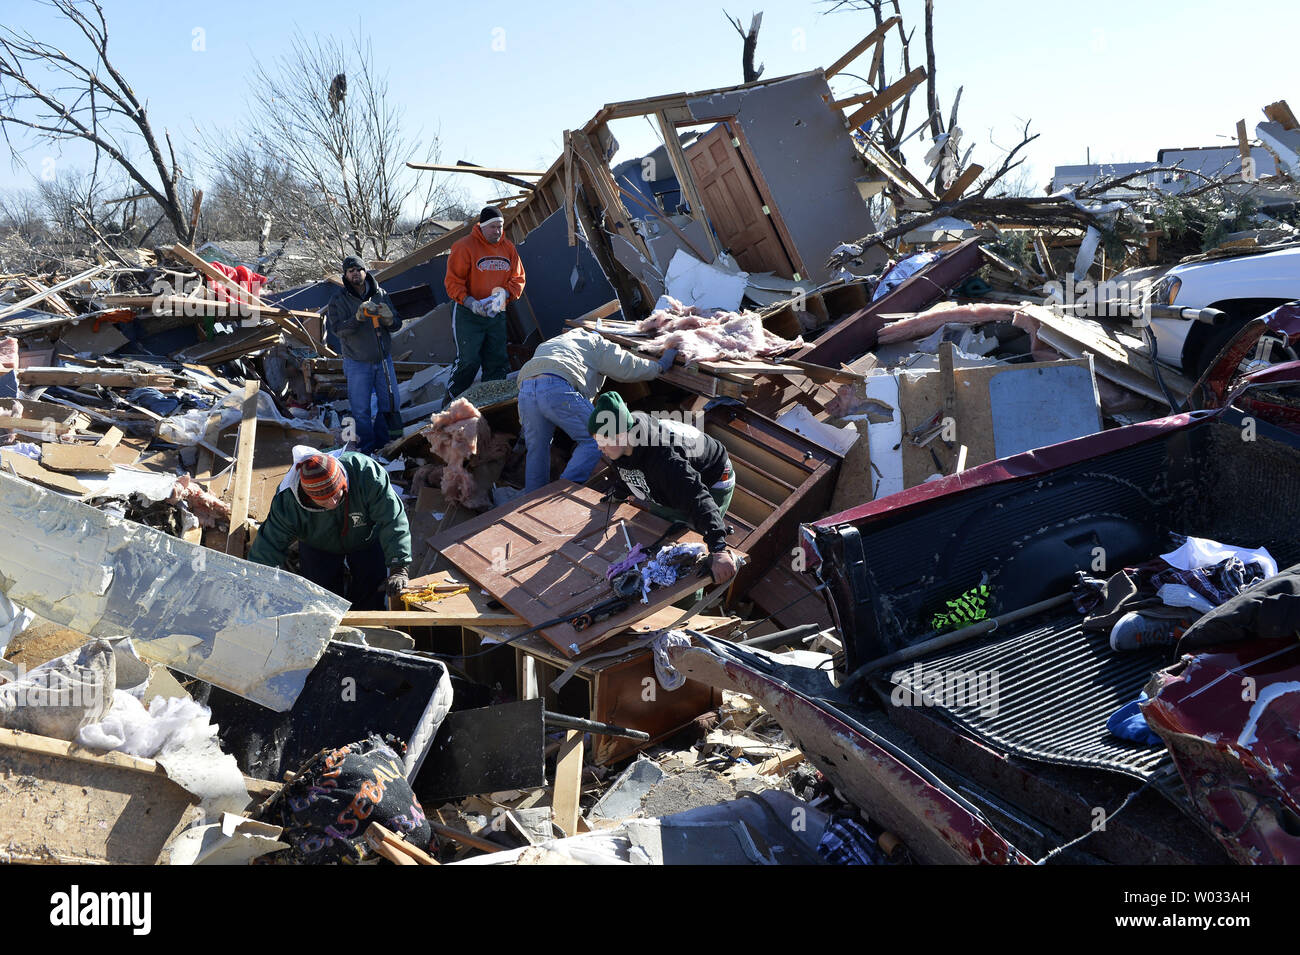 Residents sort through the devastation following a tornado in Washington, Illinois on November 18, 2013. Six people died and hundreds of homes were destroyed in Illinois as 81 tornadoes were sighted on November 17 throughout 12 midwest states including the EF4 tornado that struck Washington, Illinois.     UPI/Brian Kersey.     UPI/Brian Kersey Stock Photo